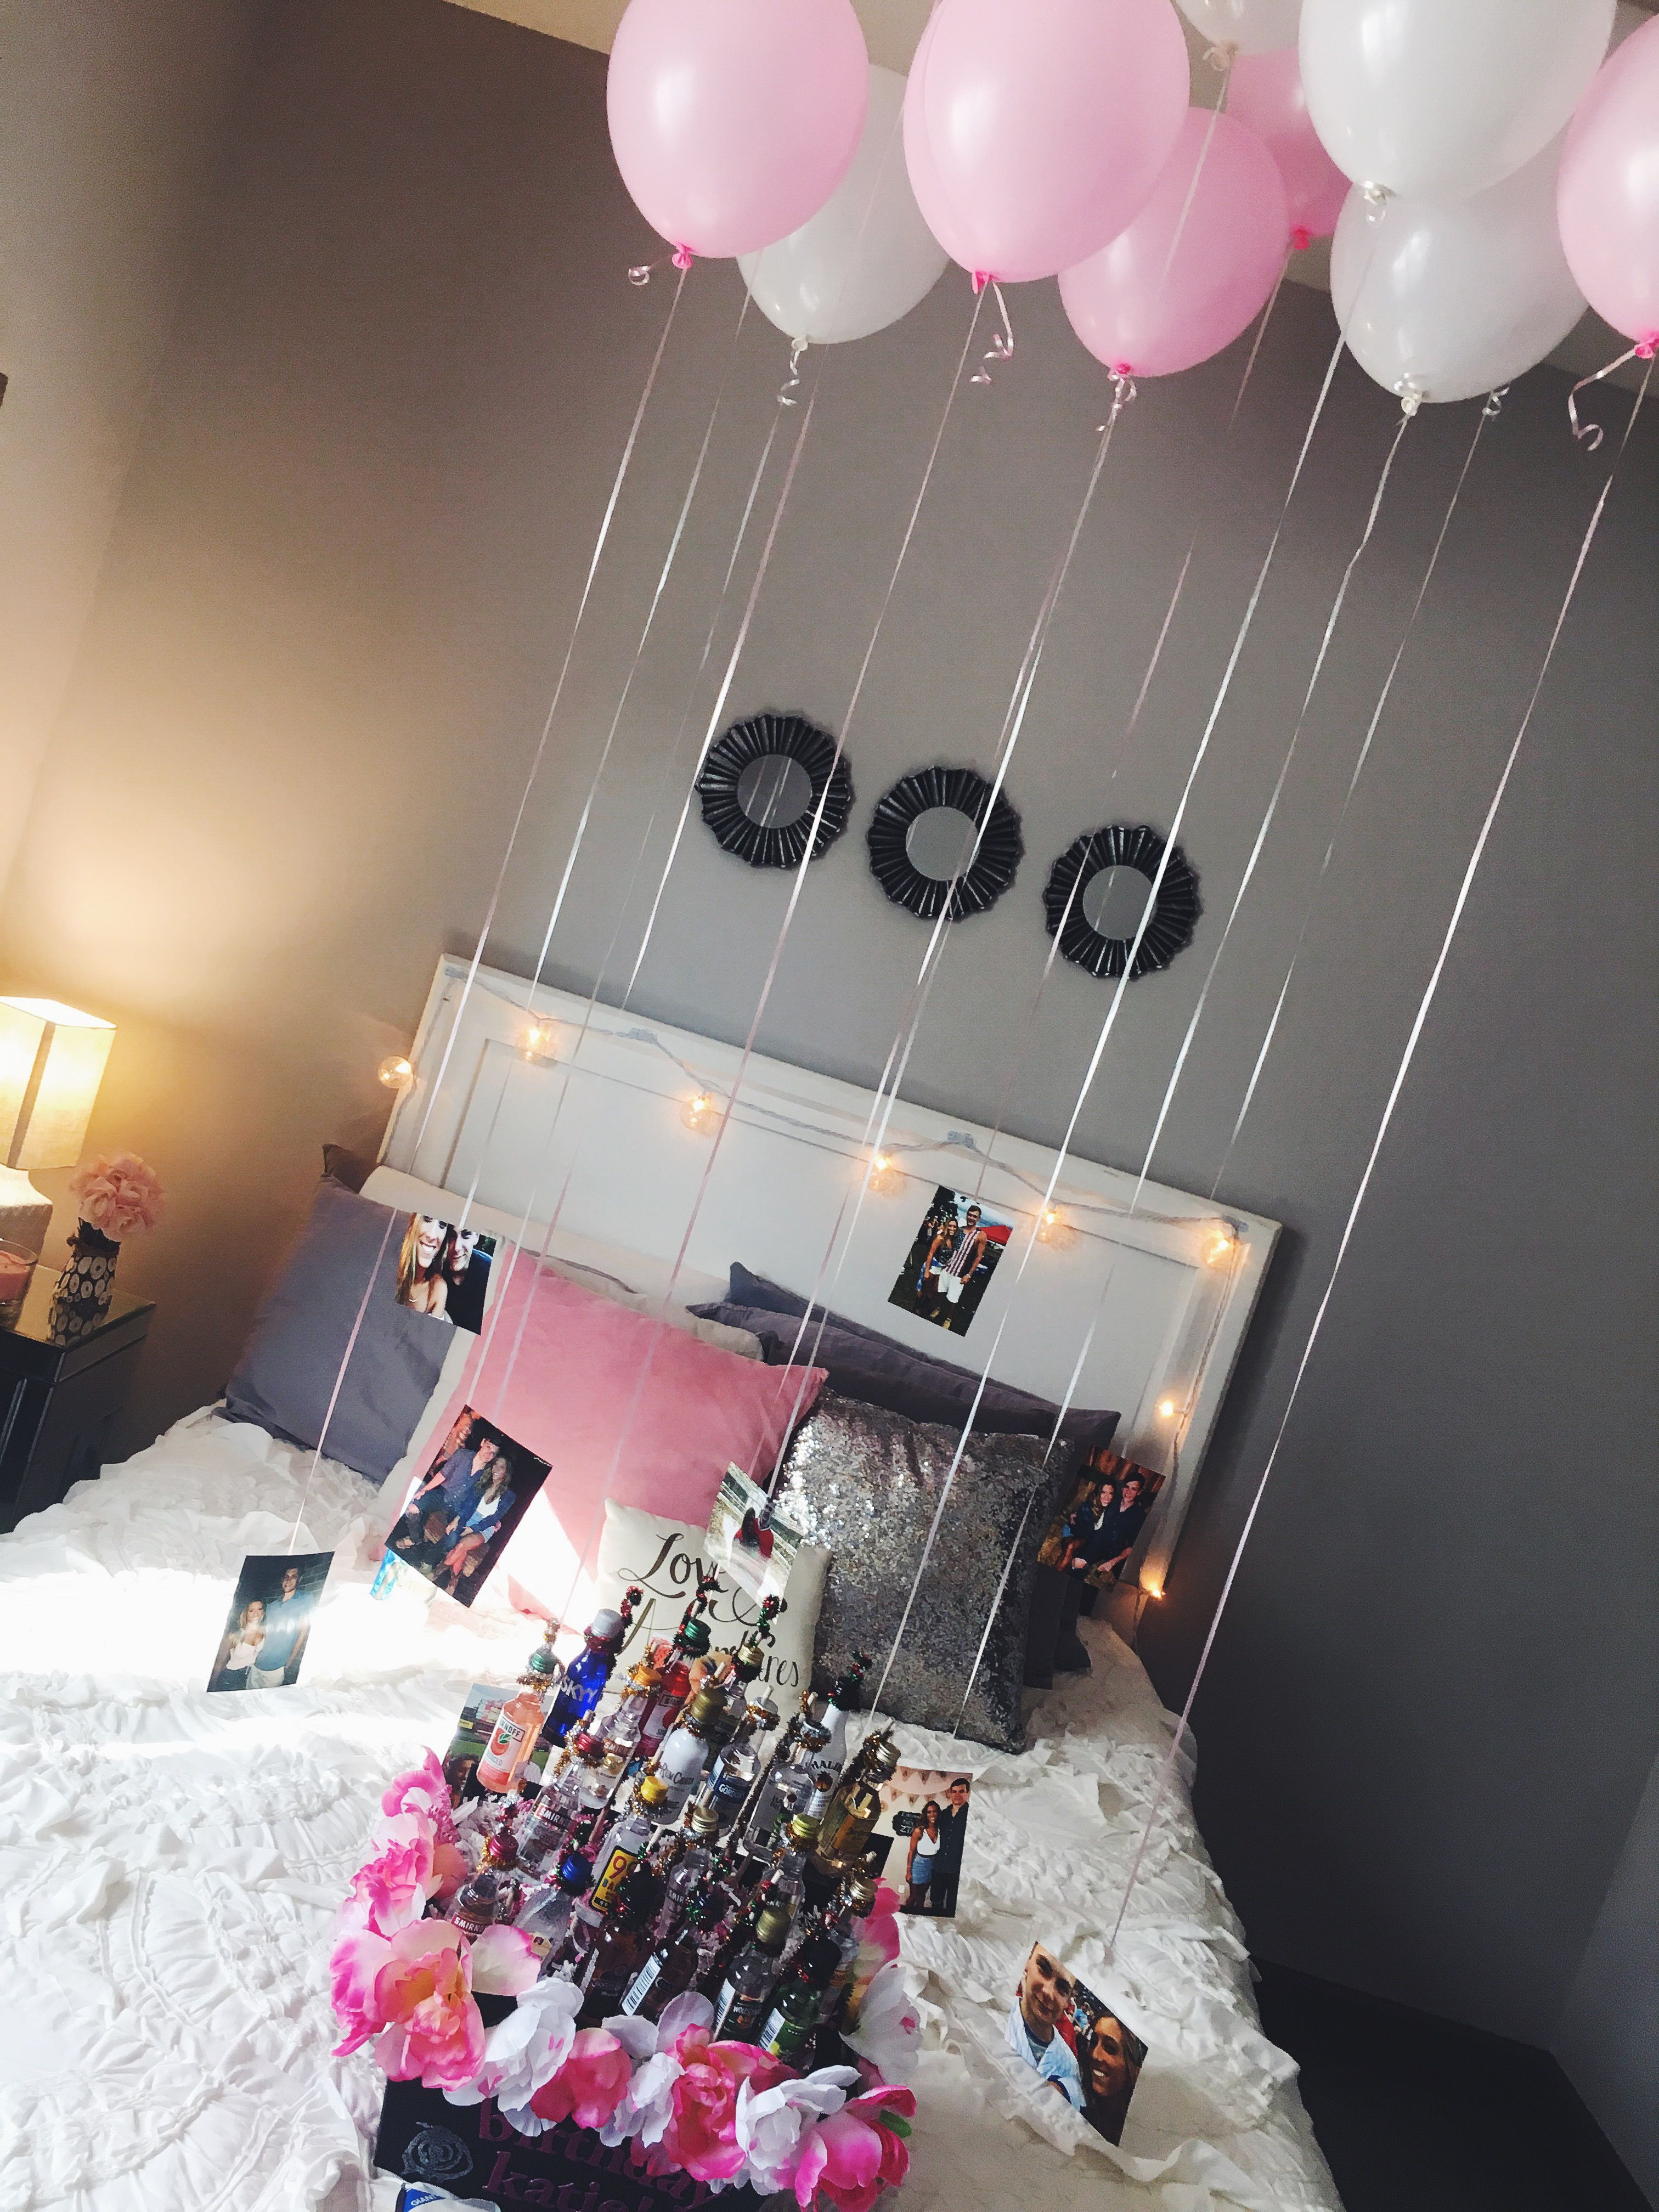 Birthday Gift Ideas For My Girlfriend
 easy and cute decorations for a friend or girlfriends 21st